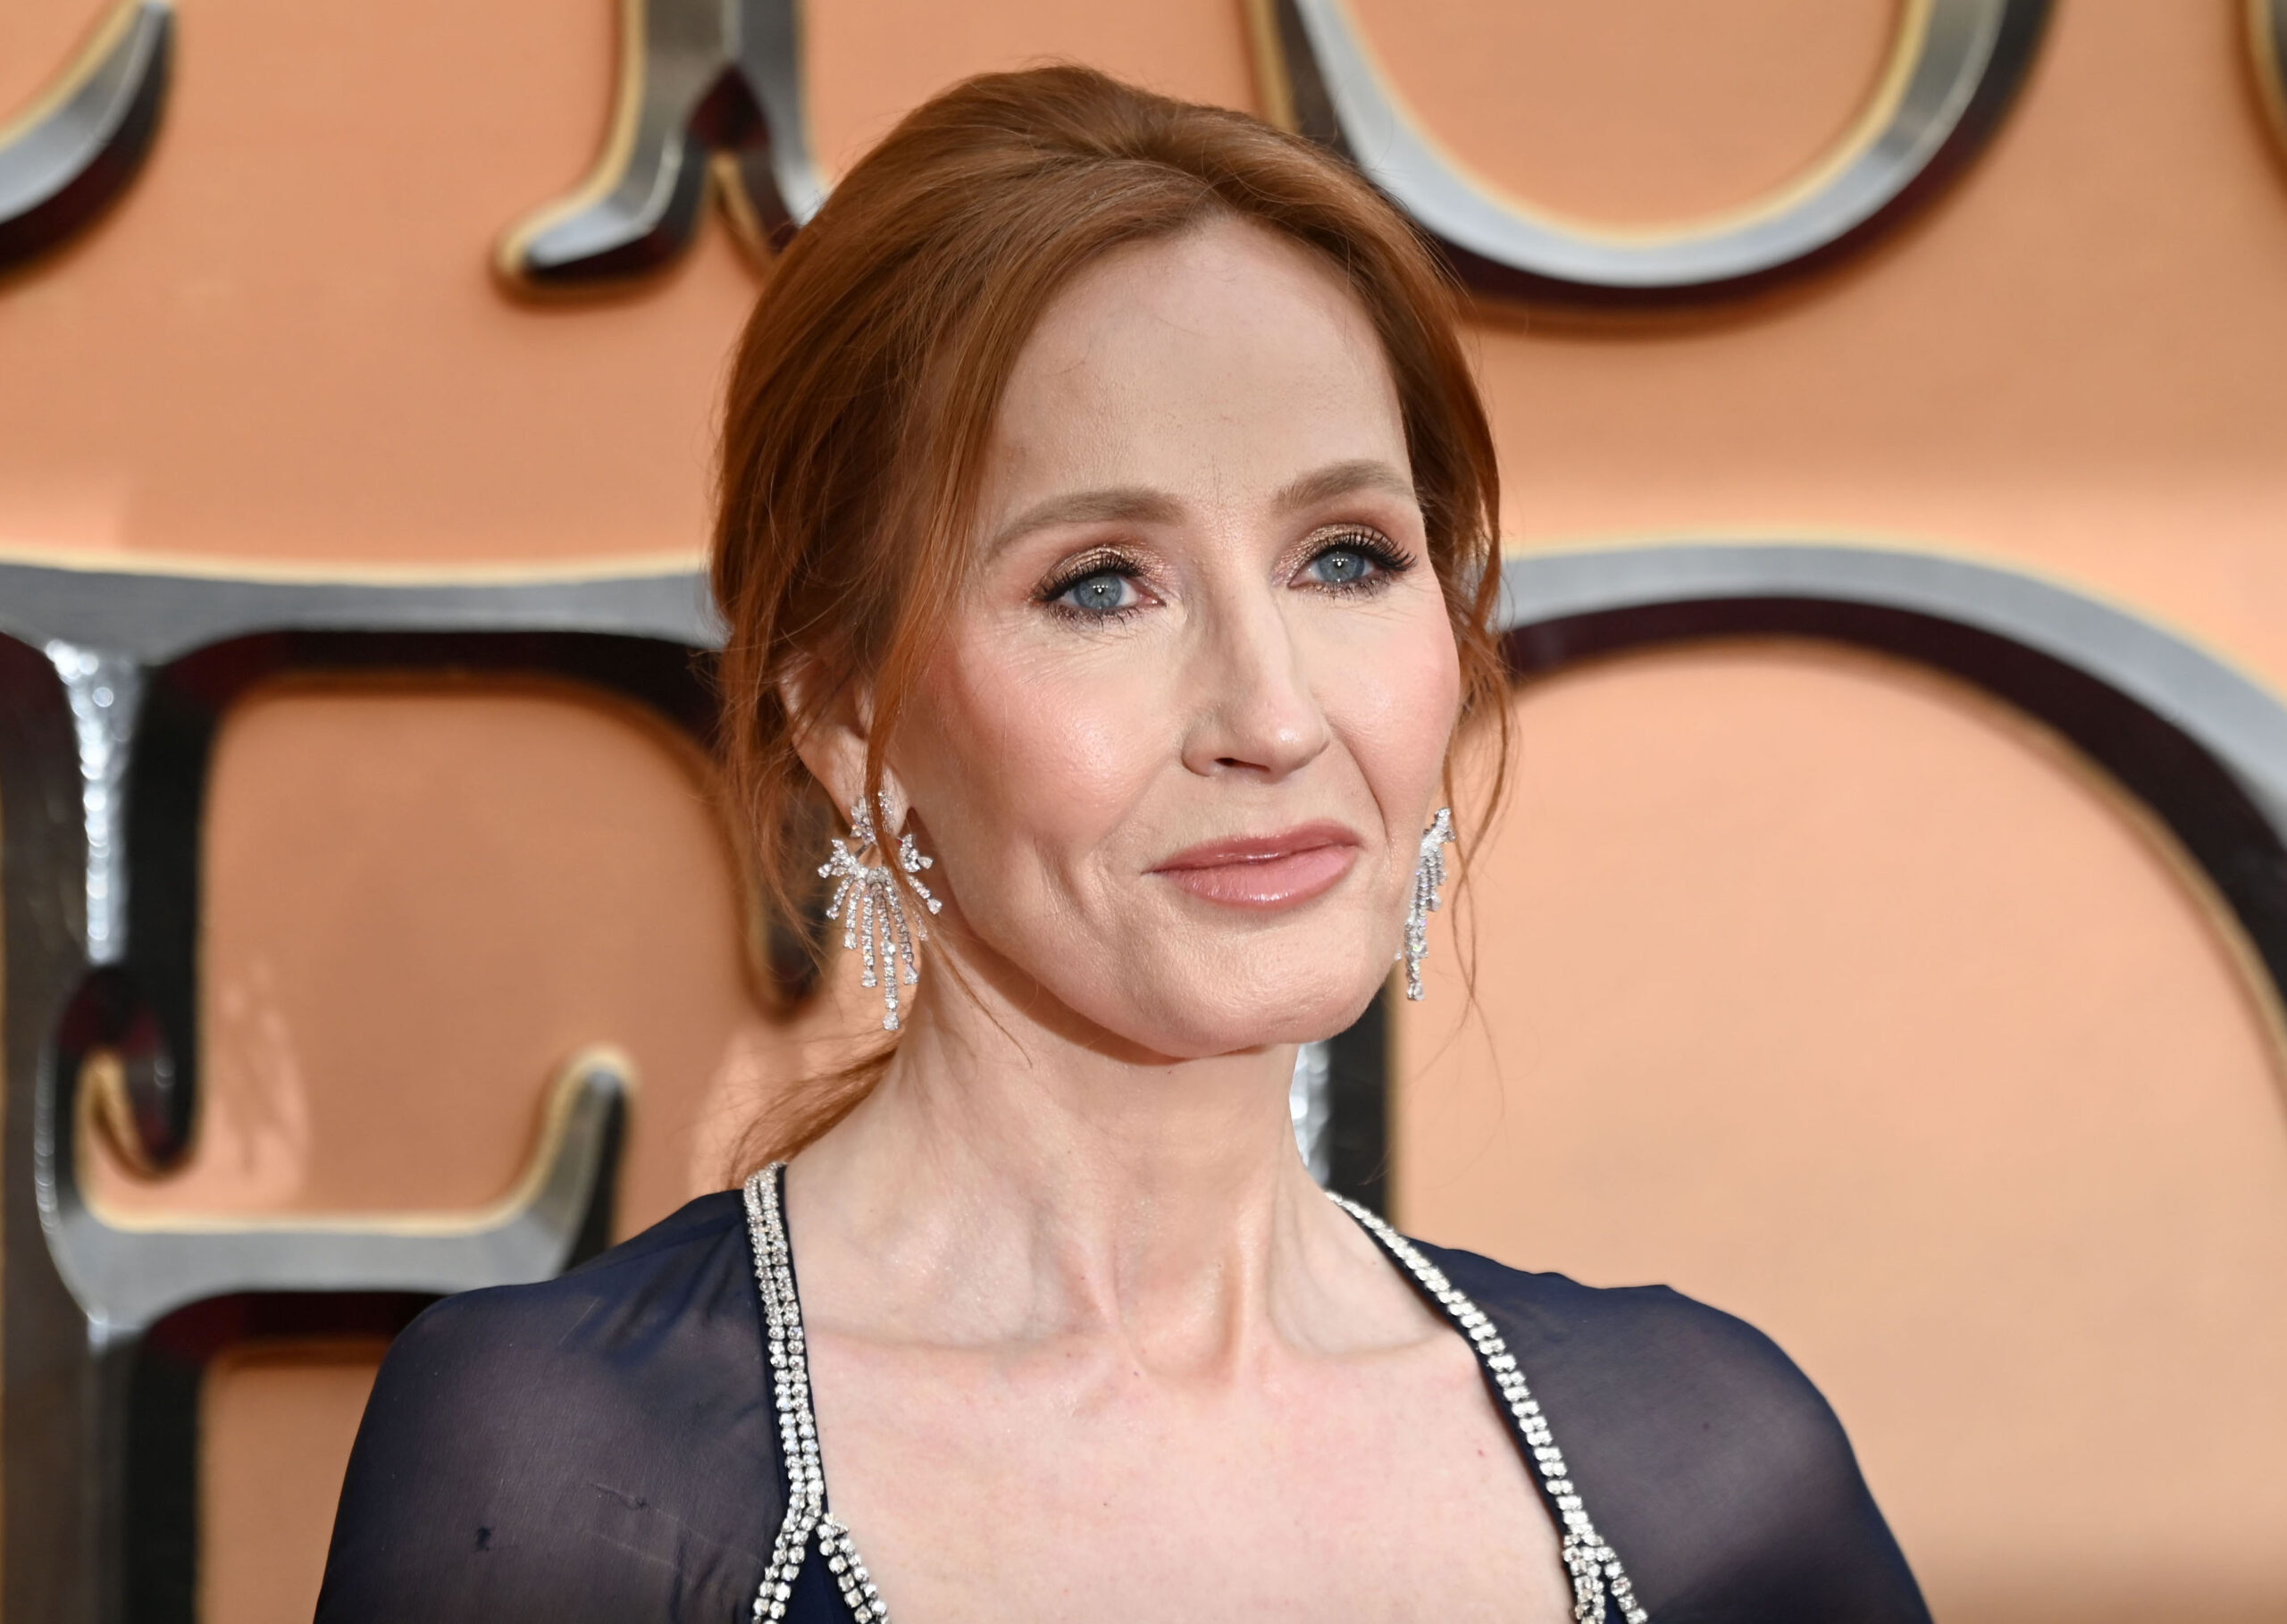 HBO Refuses To Cave To Woke Mob, Backs J.K. Rowling As Executive Producer On ‘Harry Potter’ TV Series